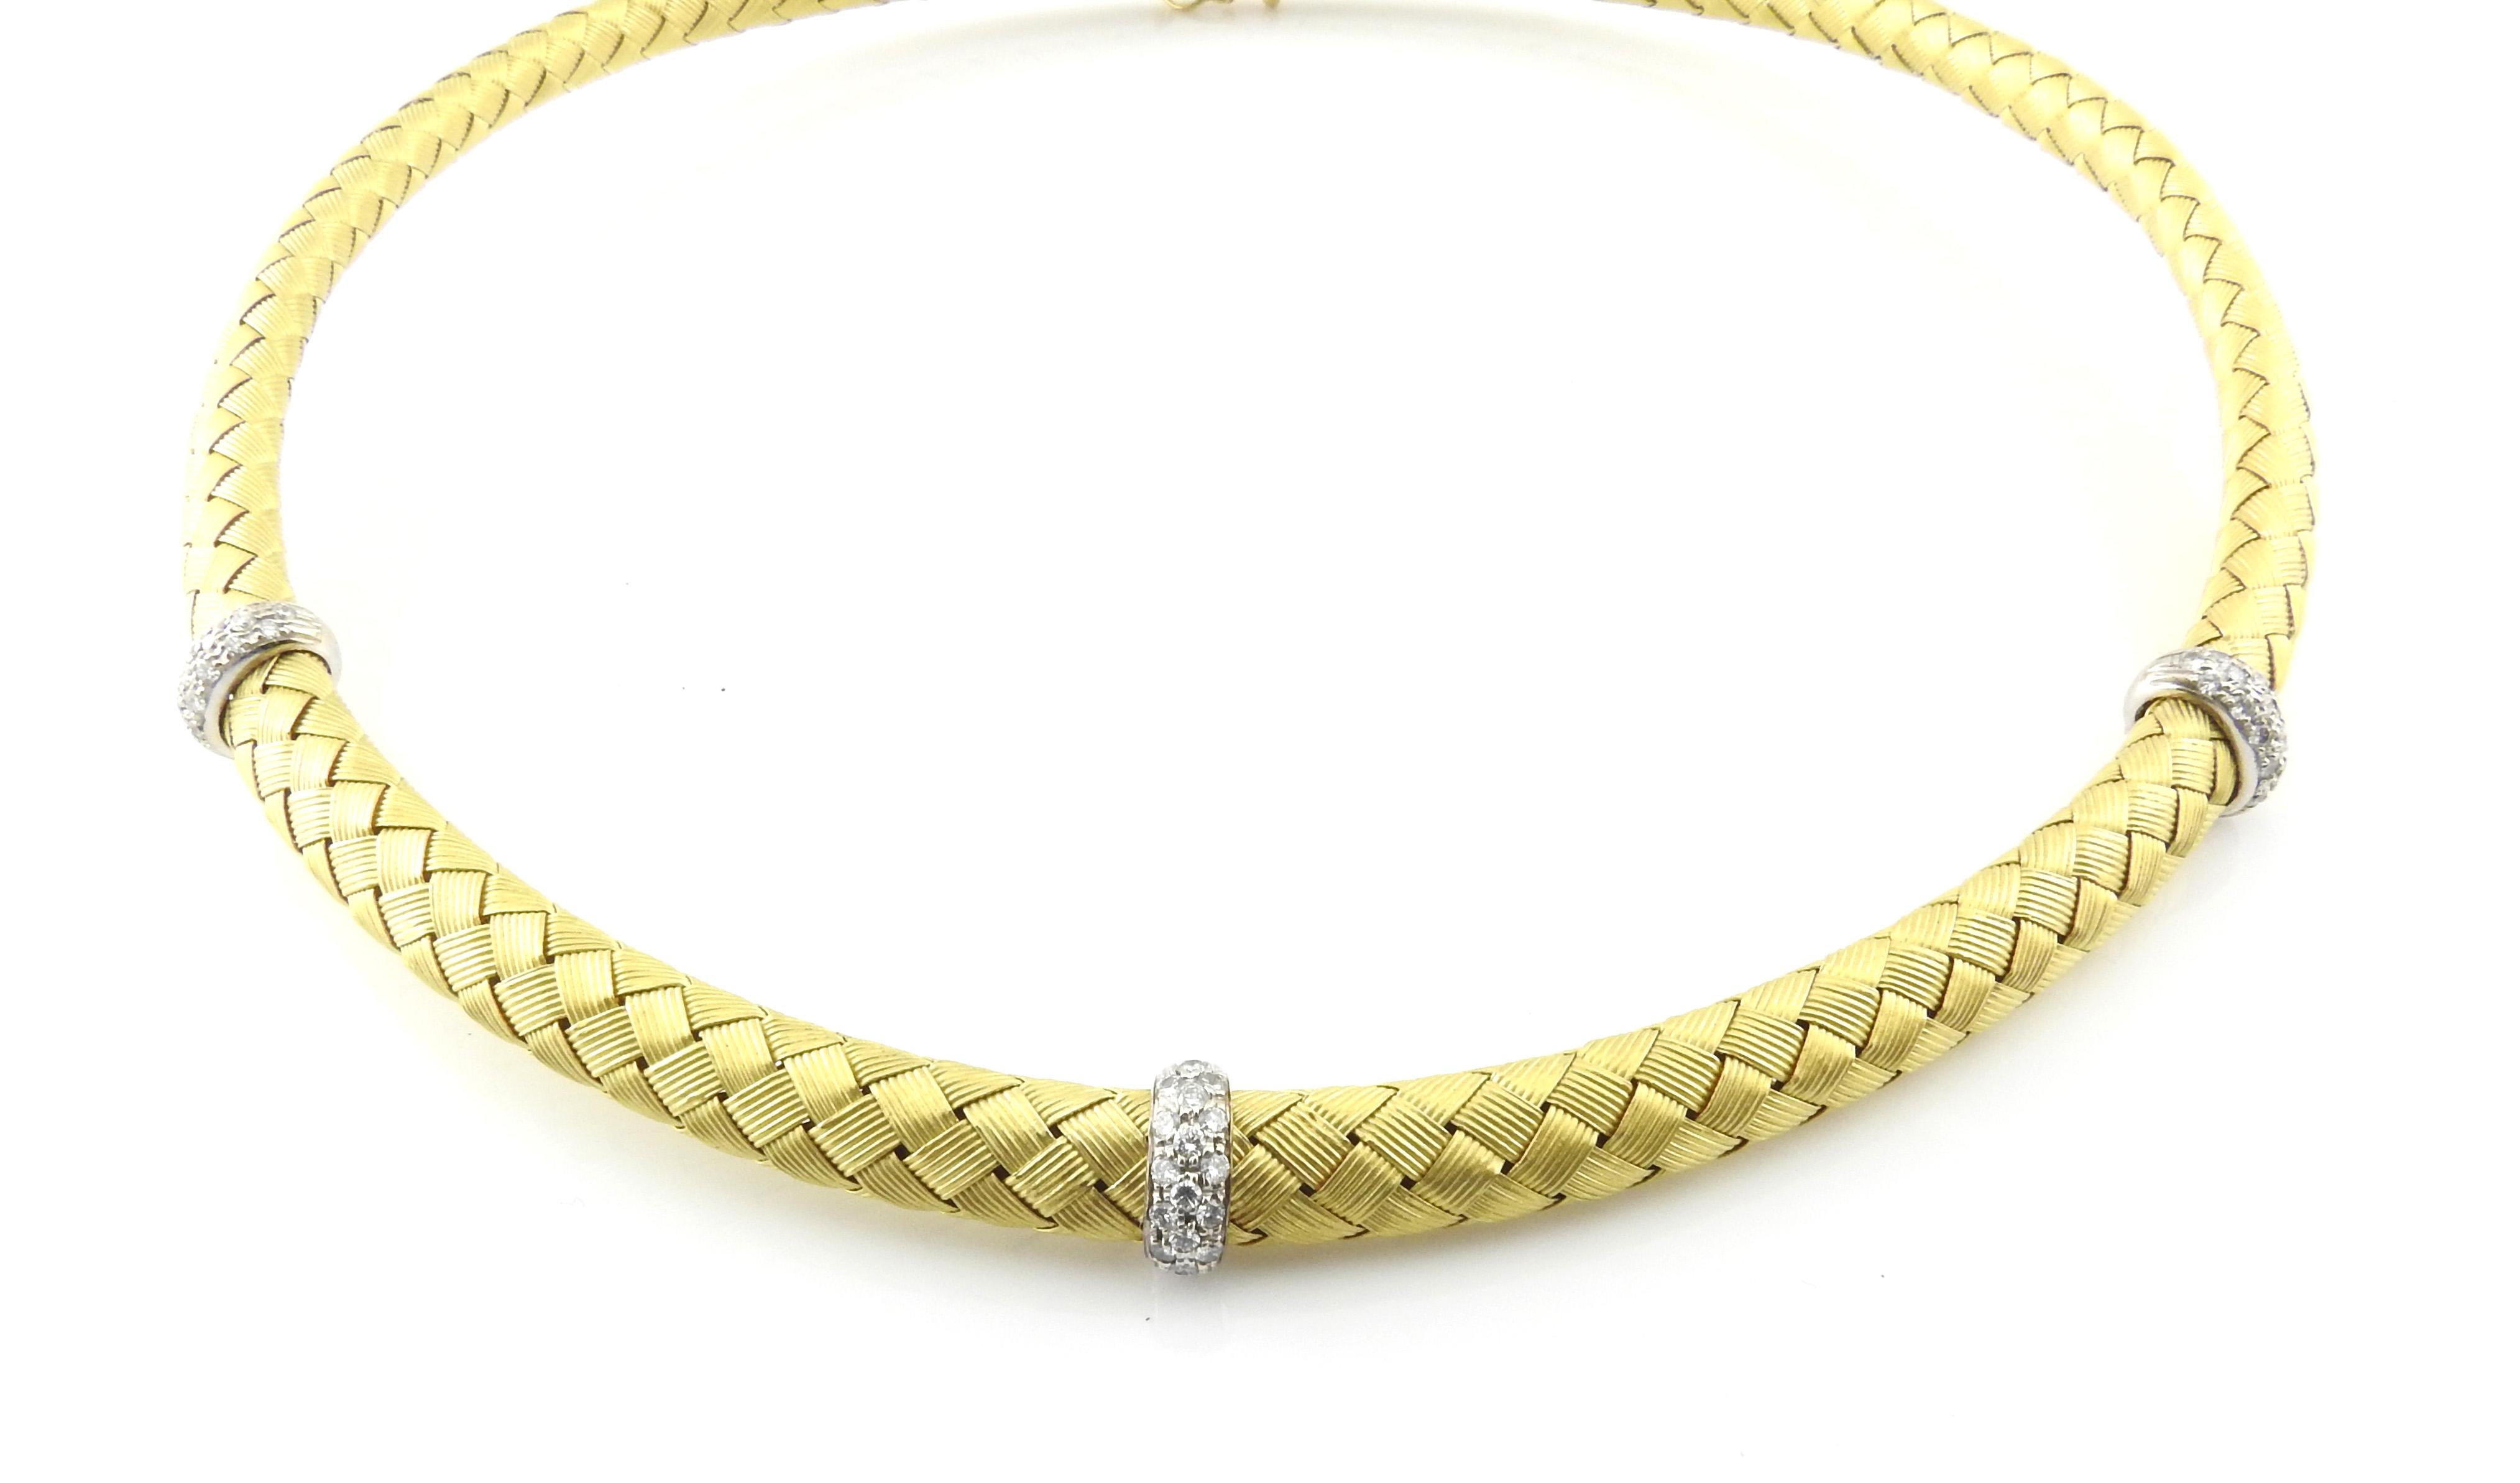 Roberto Coin 18K Yellow Gold and Woven Silk Diamond Necklace

This gorgeous Roberto Coin choker is set in 18K yellow gold and woven silk.

Three stations of diamonds total approx. .48cts. Diamonds are round brilliant cut and of VS clarity, G